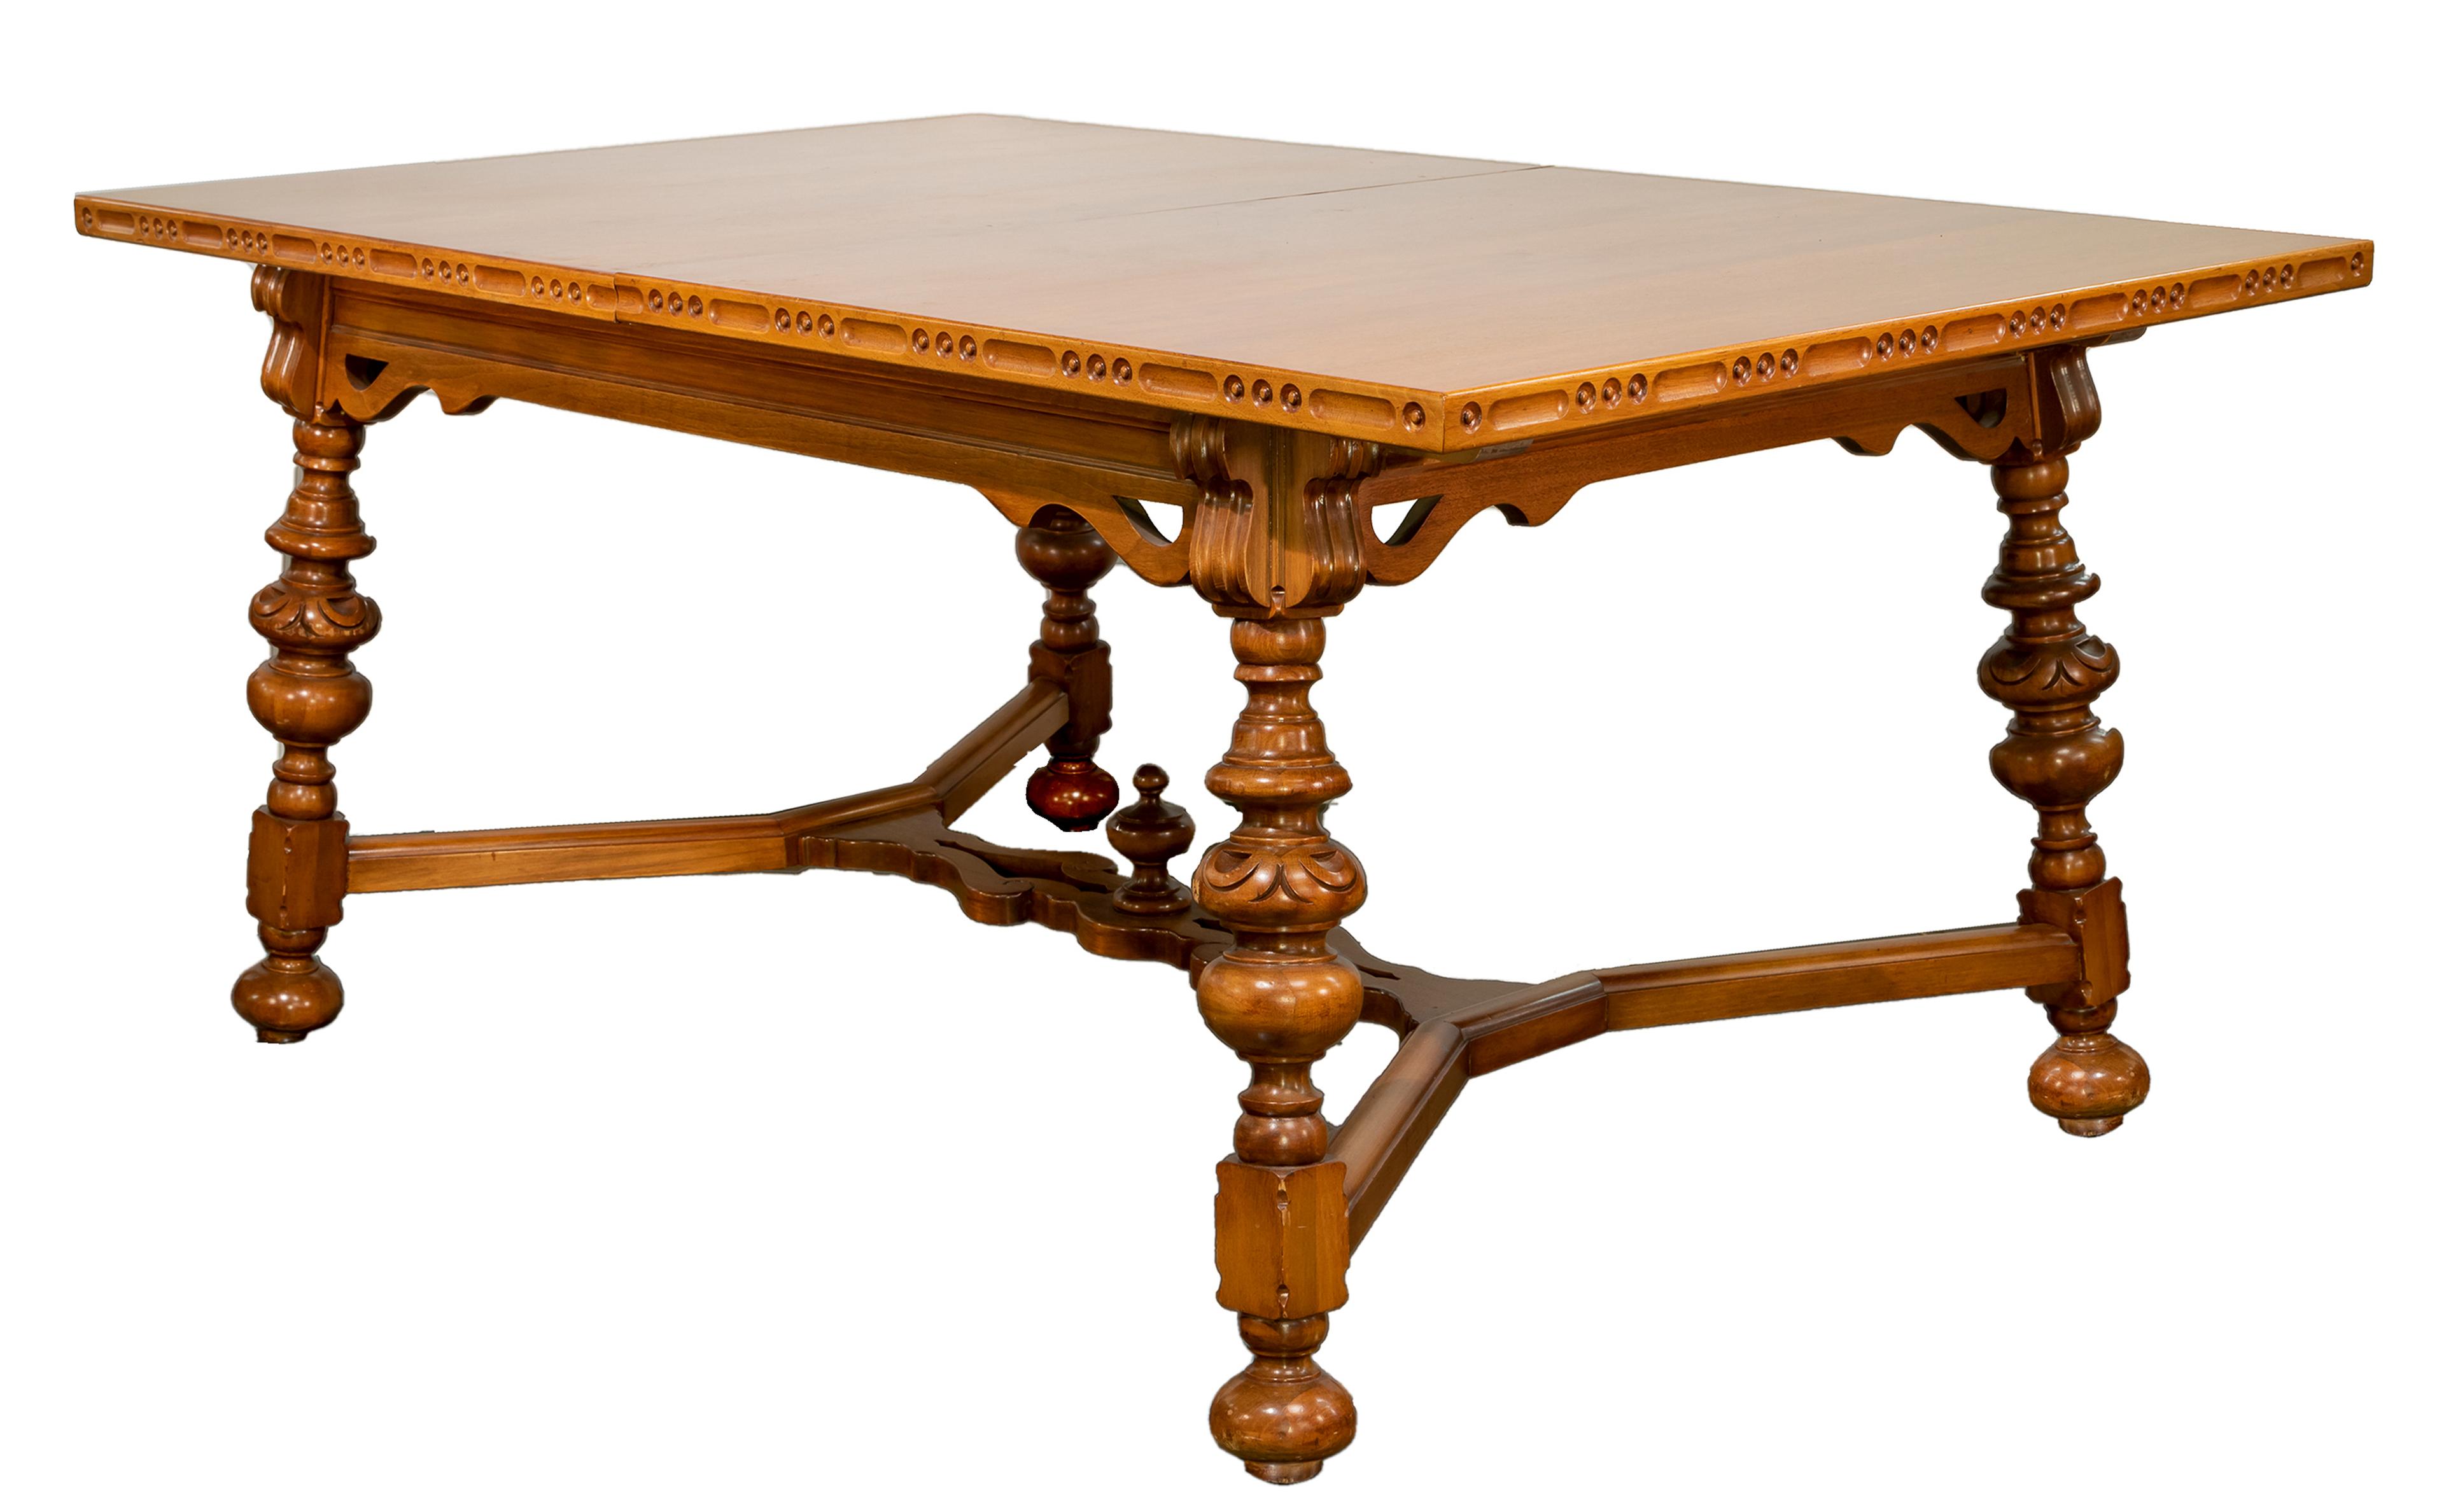 Grand Rapids Chair Co. Spanish Renaissance Dining Table and Chairs